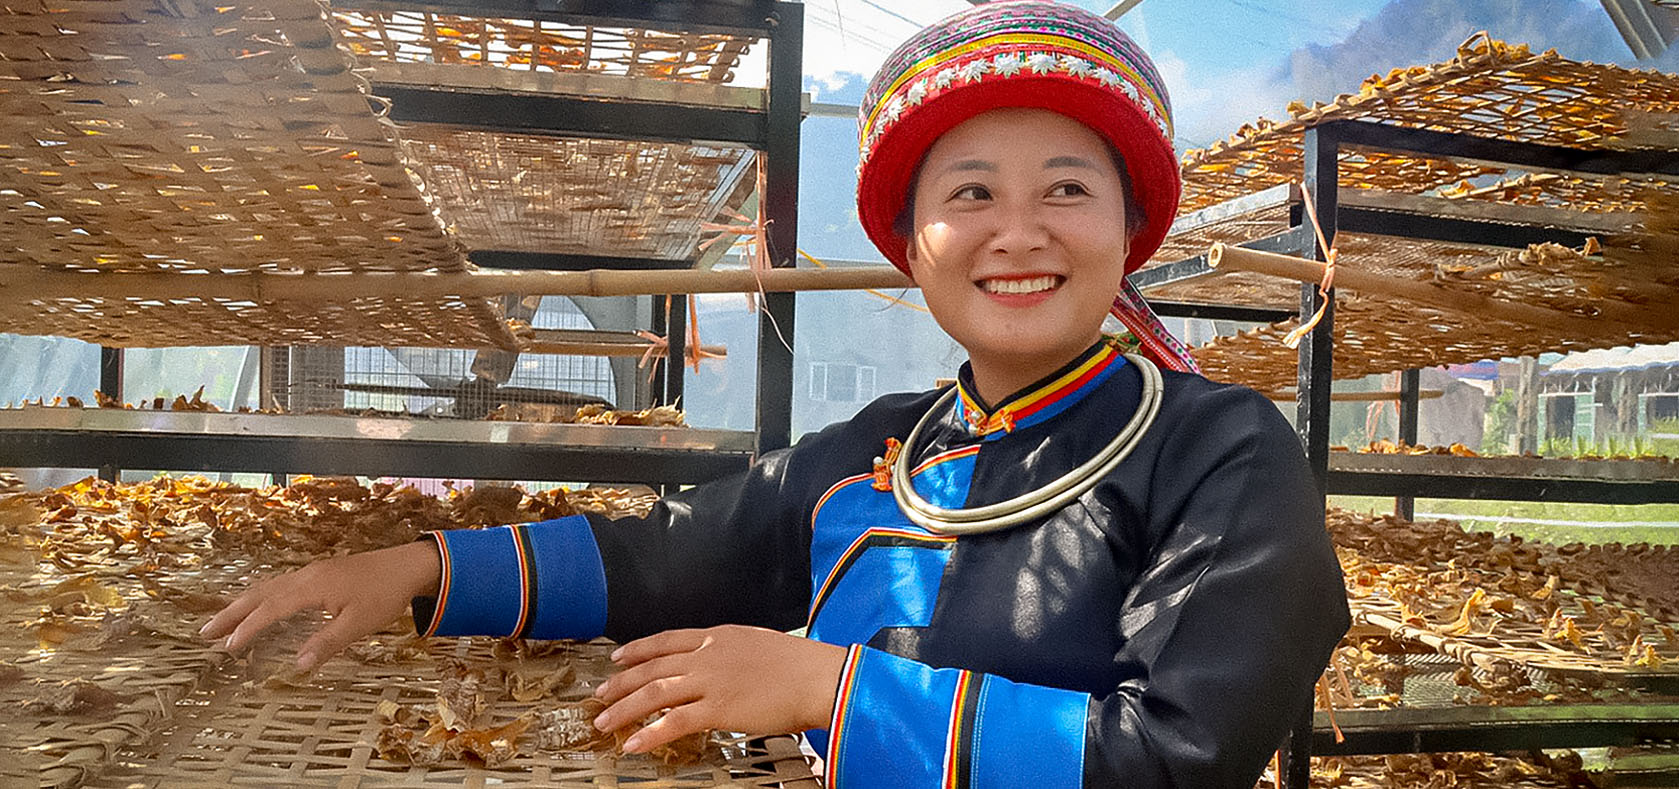 An indigenous woman in Viet Nam uses solar drying systems provided by the EmPower project. Bắc Kạn Province, October 2022. Photo: UN Women/Hoang Thao